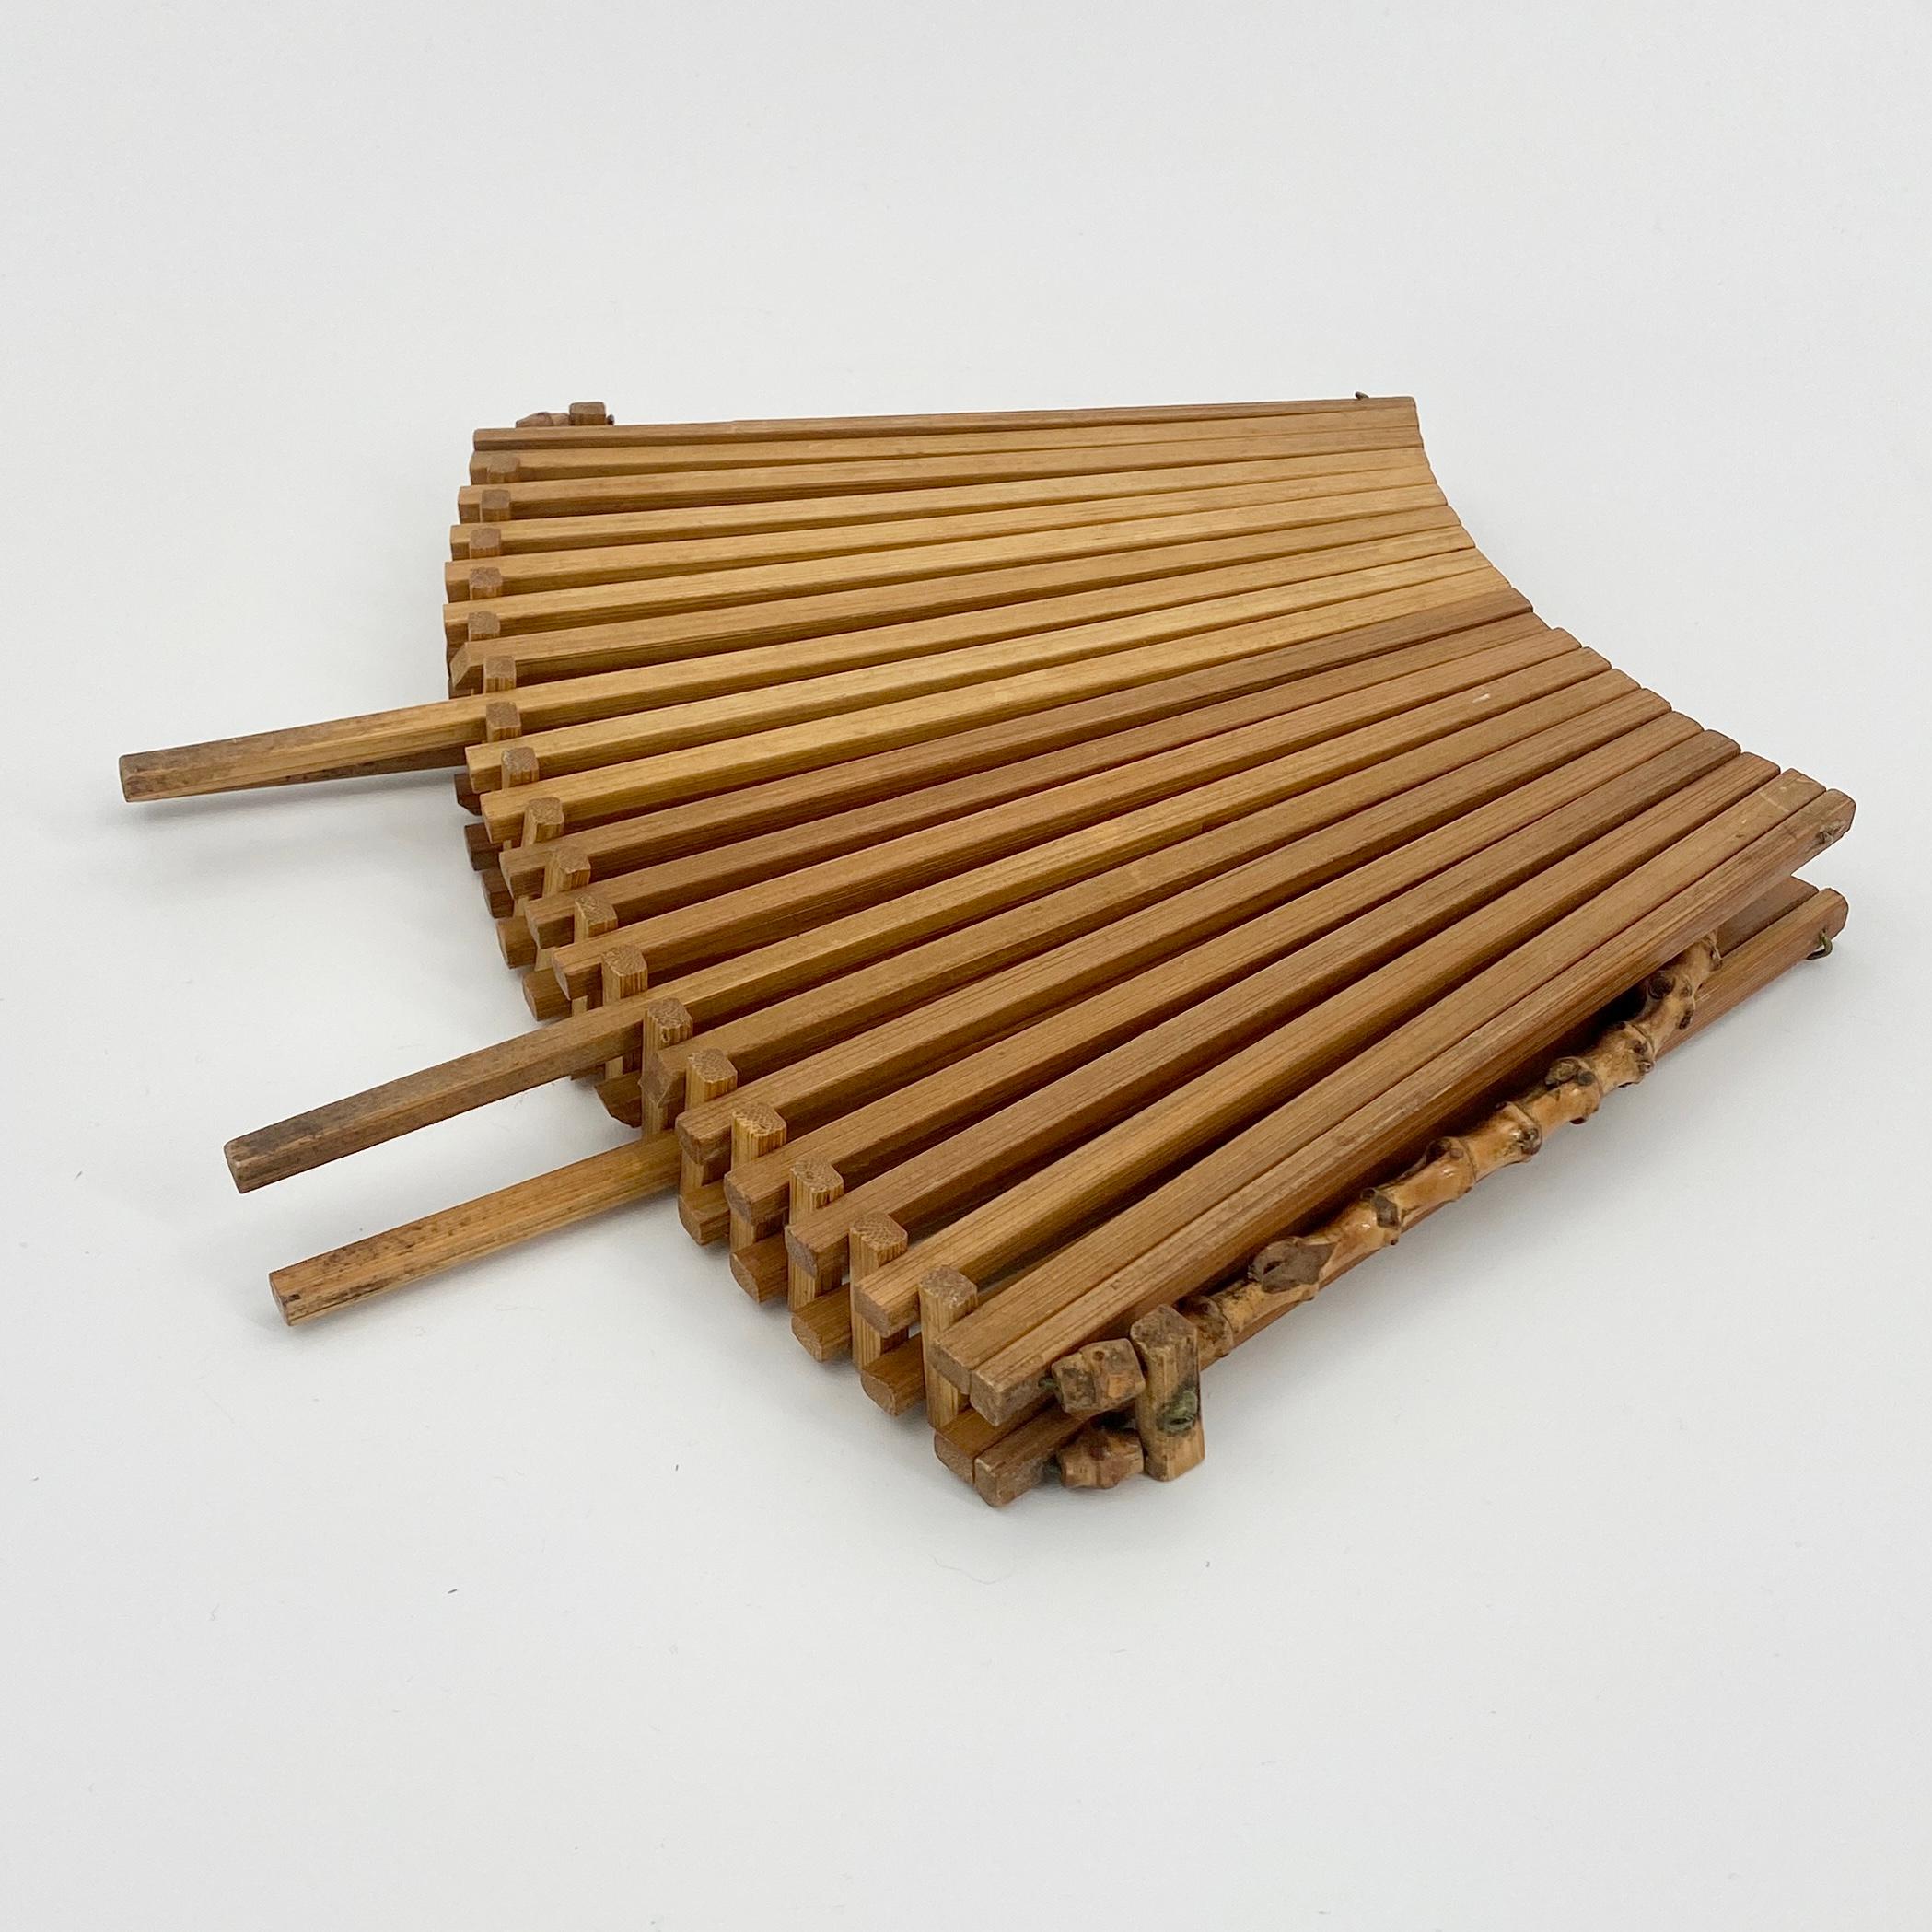 Architectural Bread or Fruit Kitchen Basket with Bamboo Handle, Denmark 12